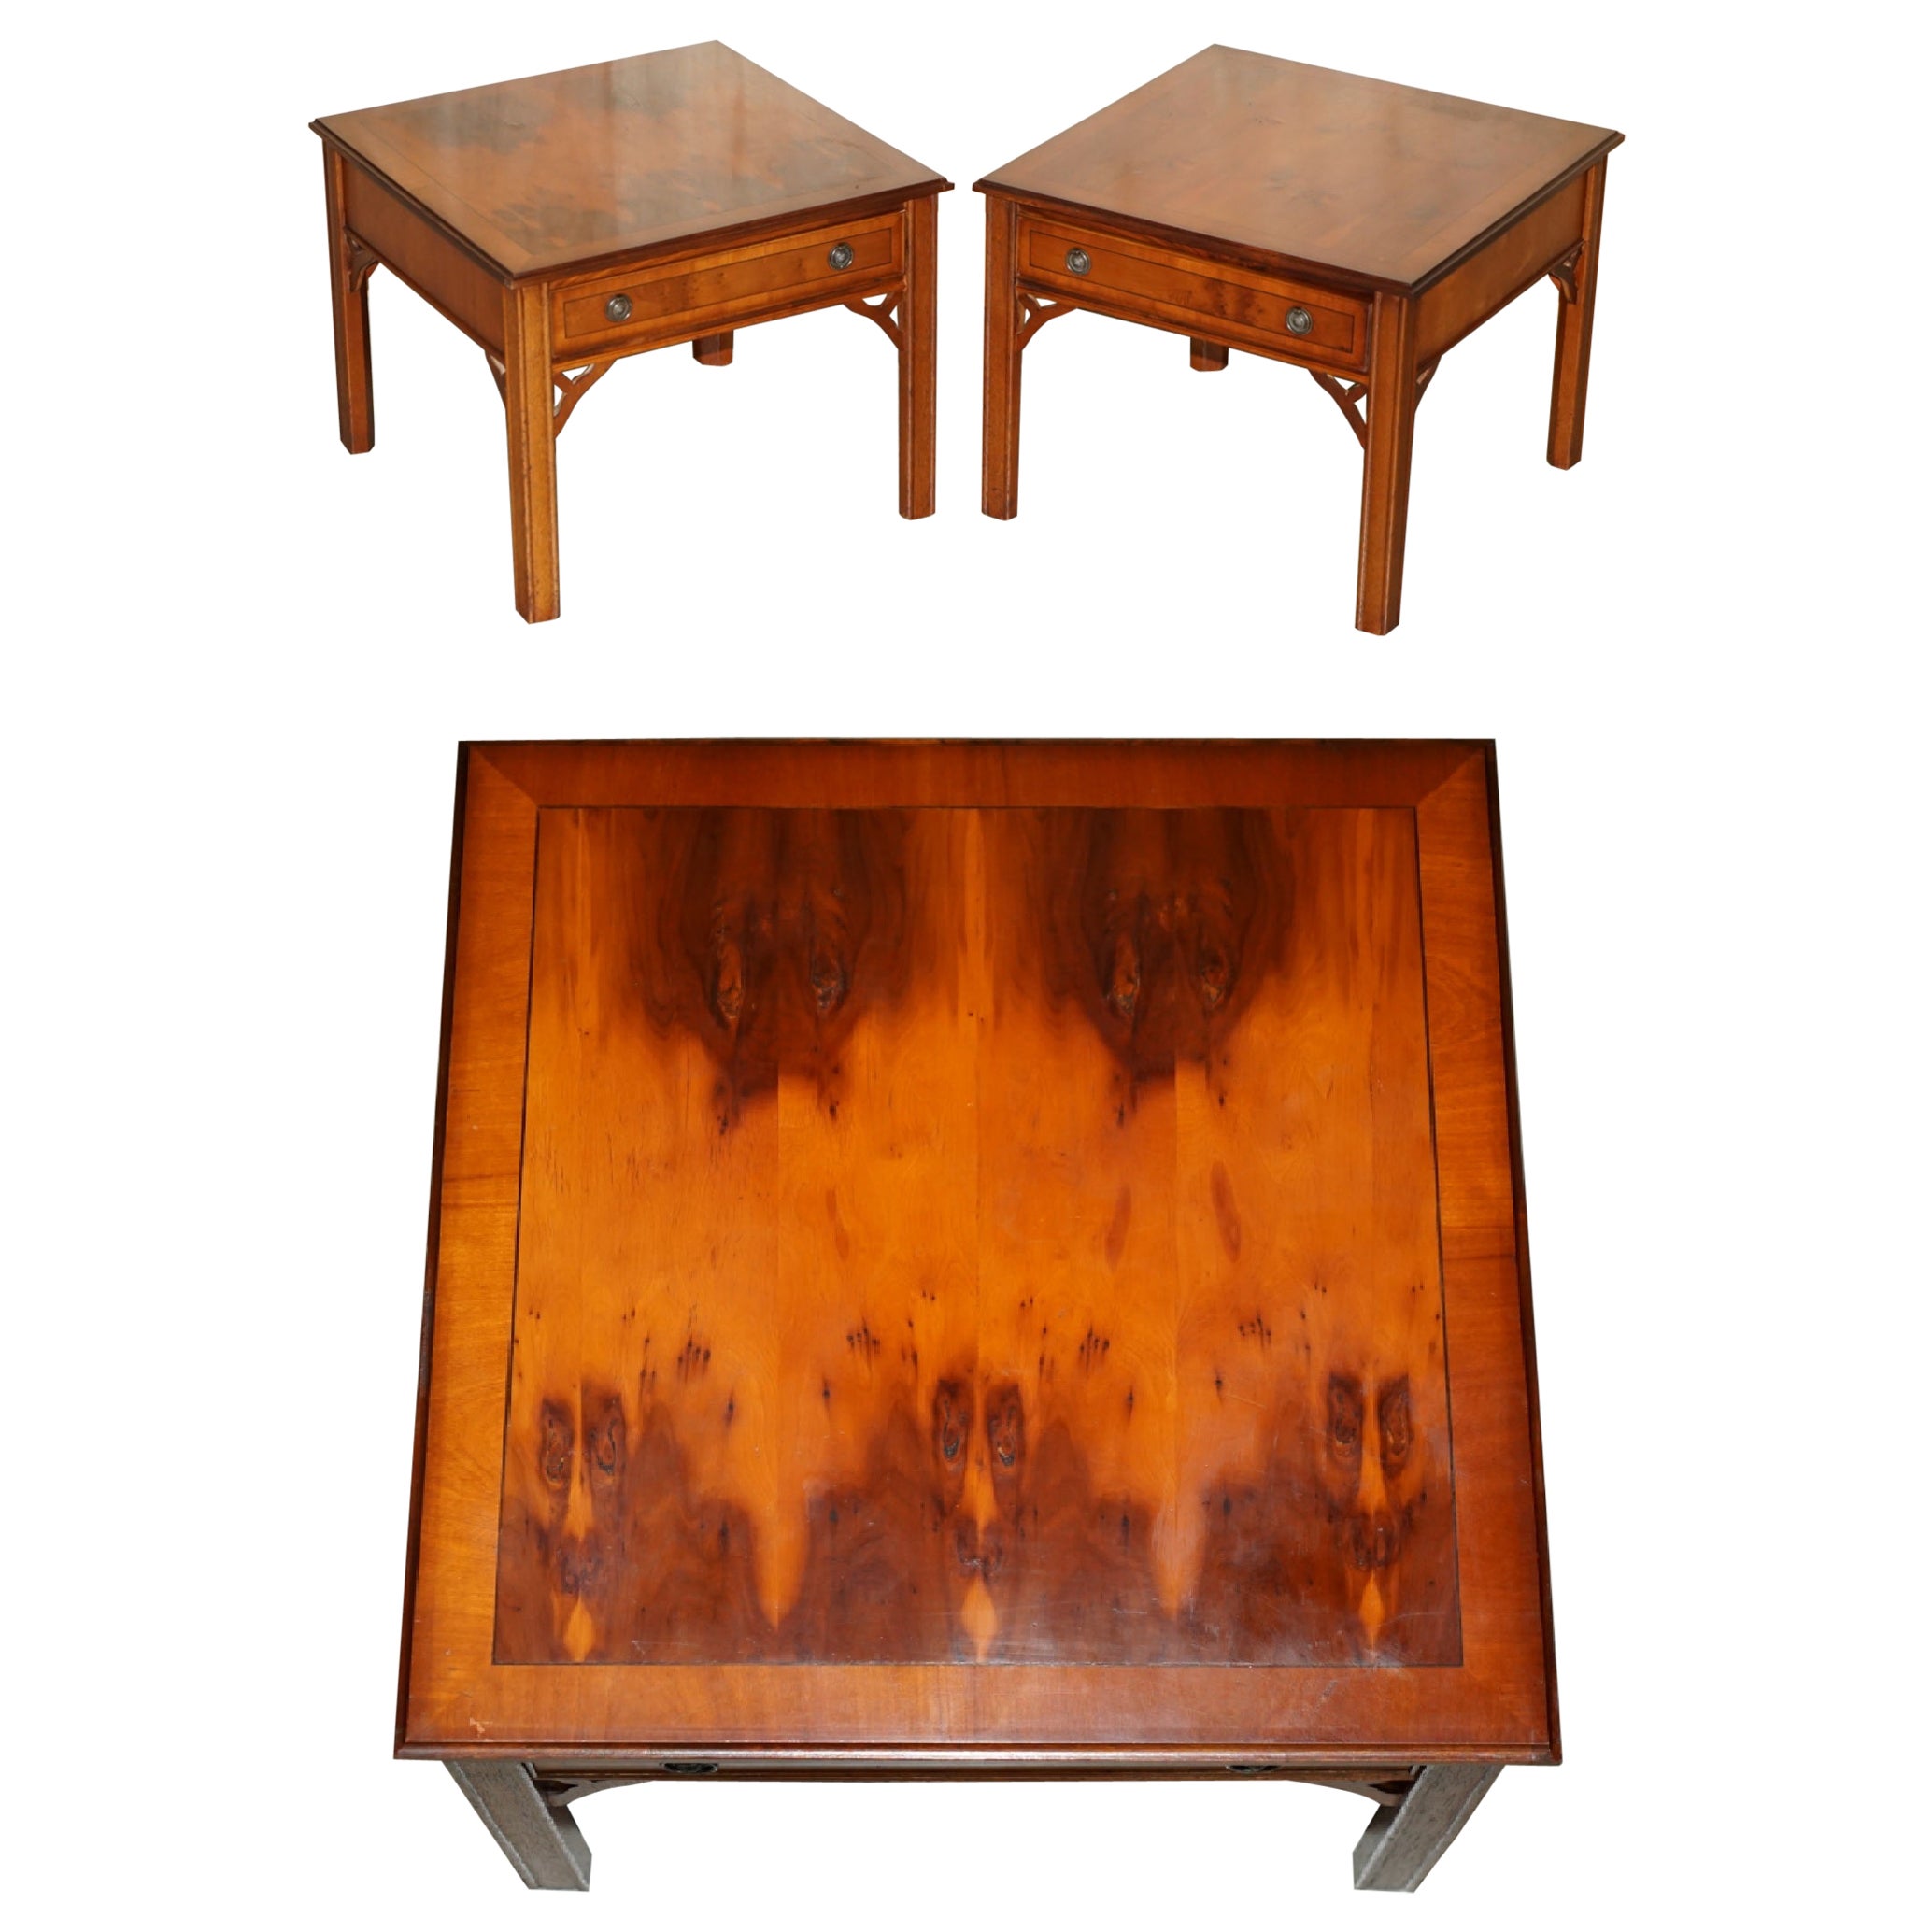 LOVELY PAIR OF BURR YEW WOOD SiDE END LAMP WINE TABLES WITH LARGE SINGLE DRAWERS For Sale